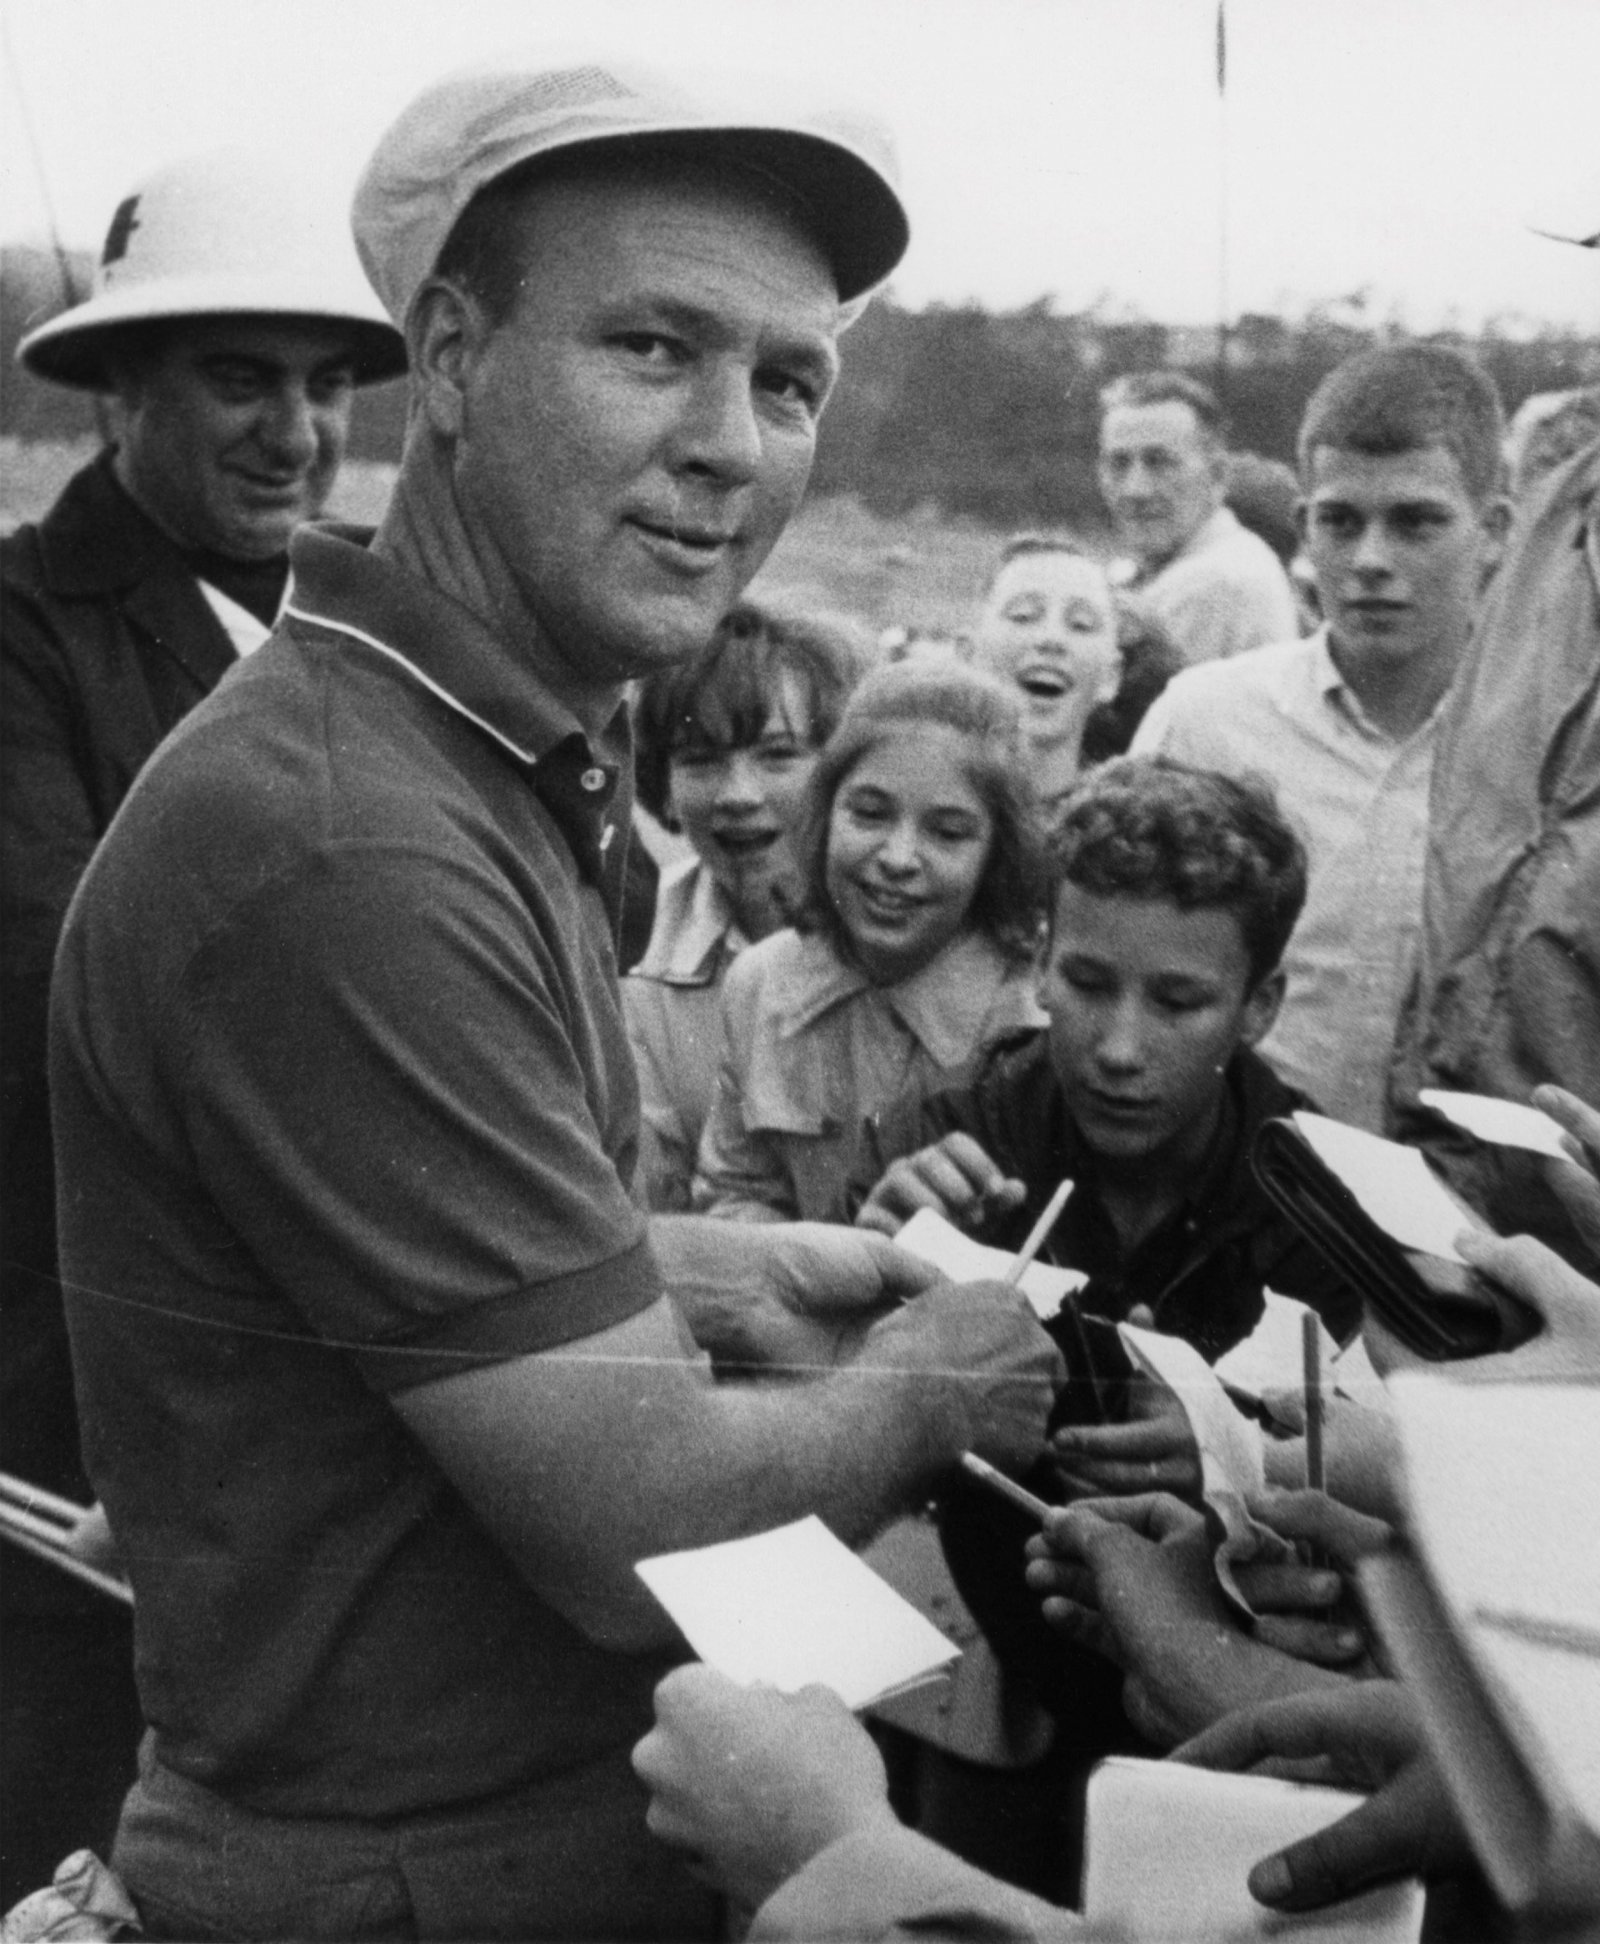 rolex-and-sports-golf-the-masters-tournament-arnold-palmer-roller-gettyimages-83112476.jpg